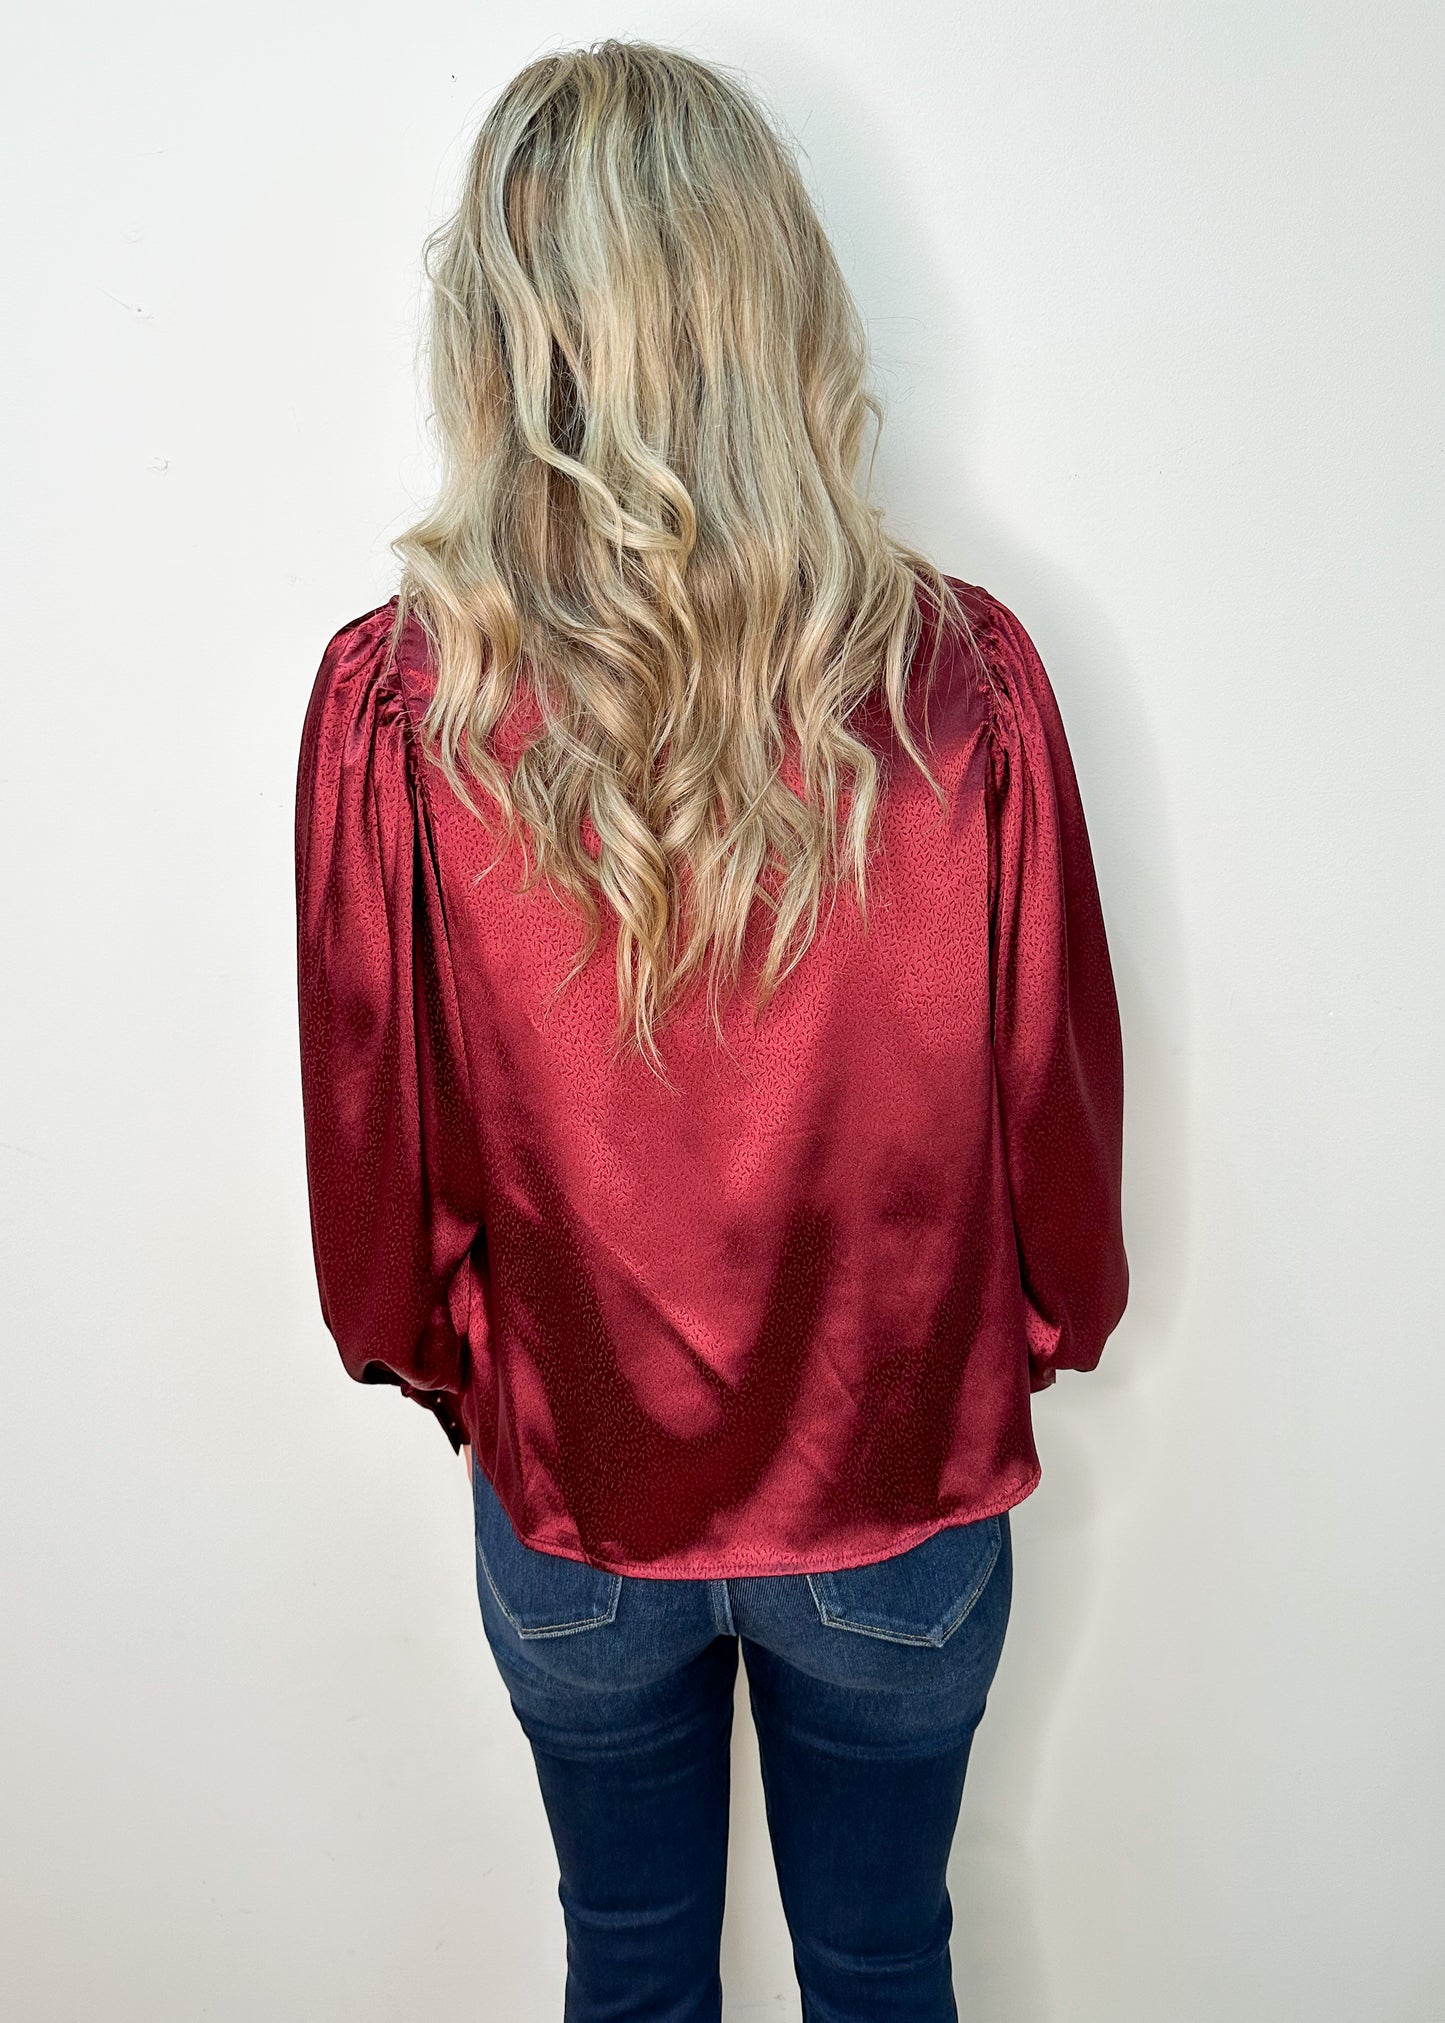 Holiday Wishes Burgundy Satin Top